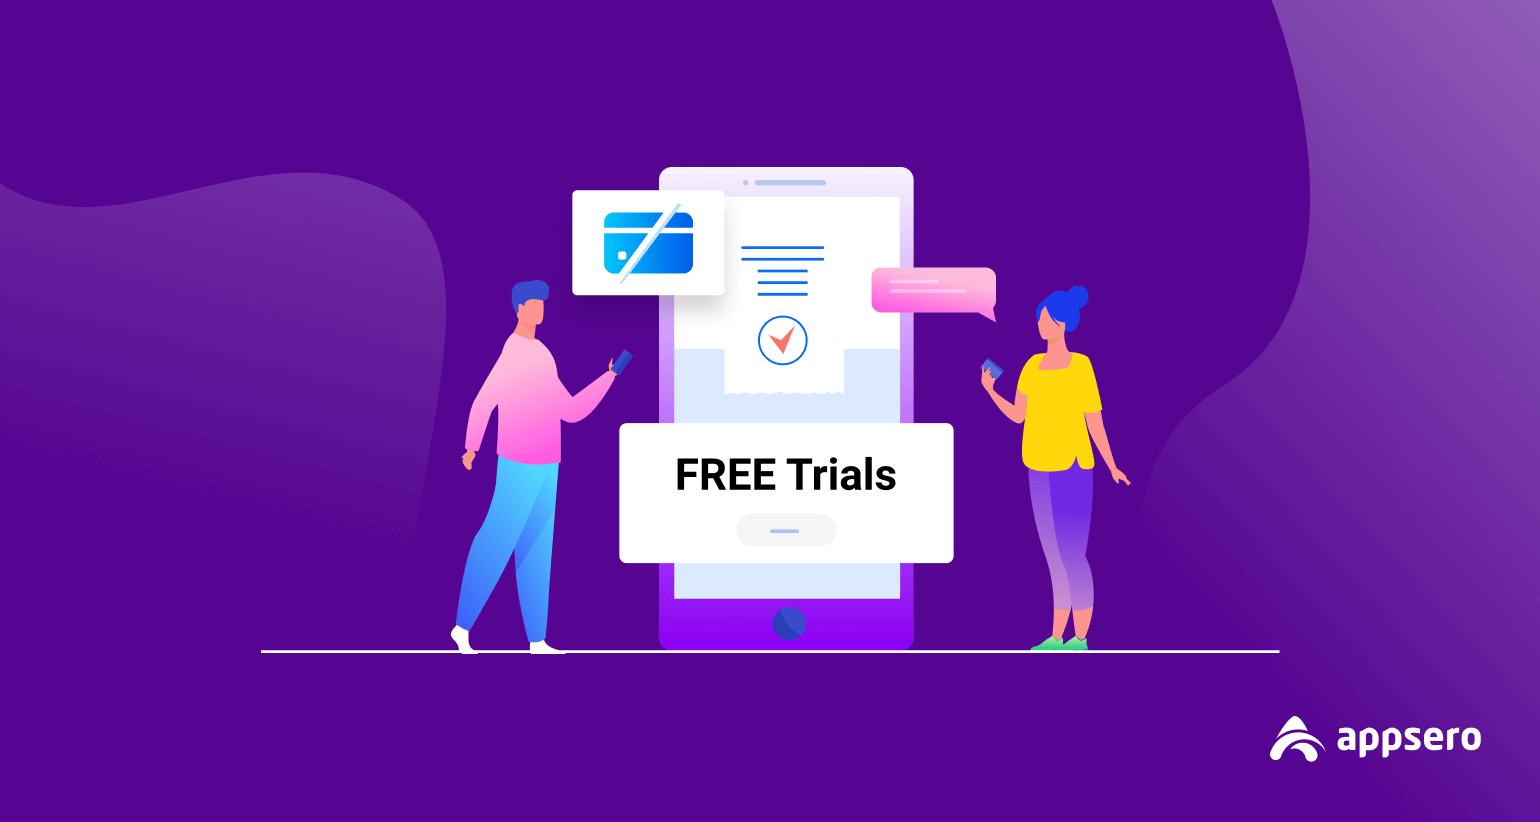 How to Get Free Trials Without Credit Card: 4 Tips from Experts in 2022